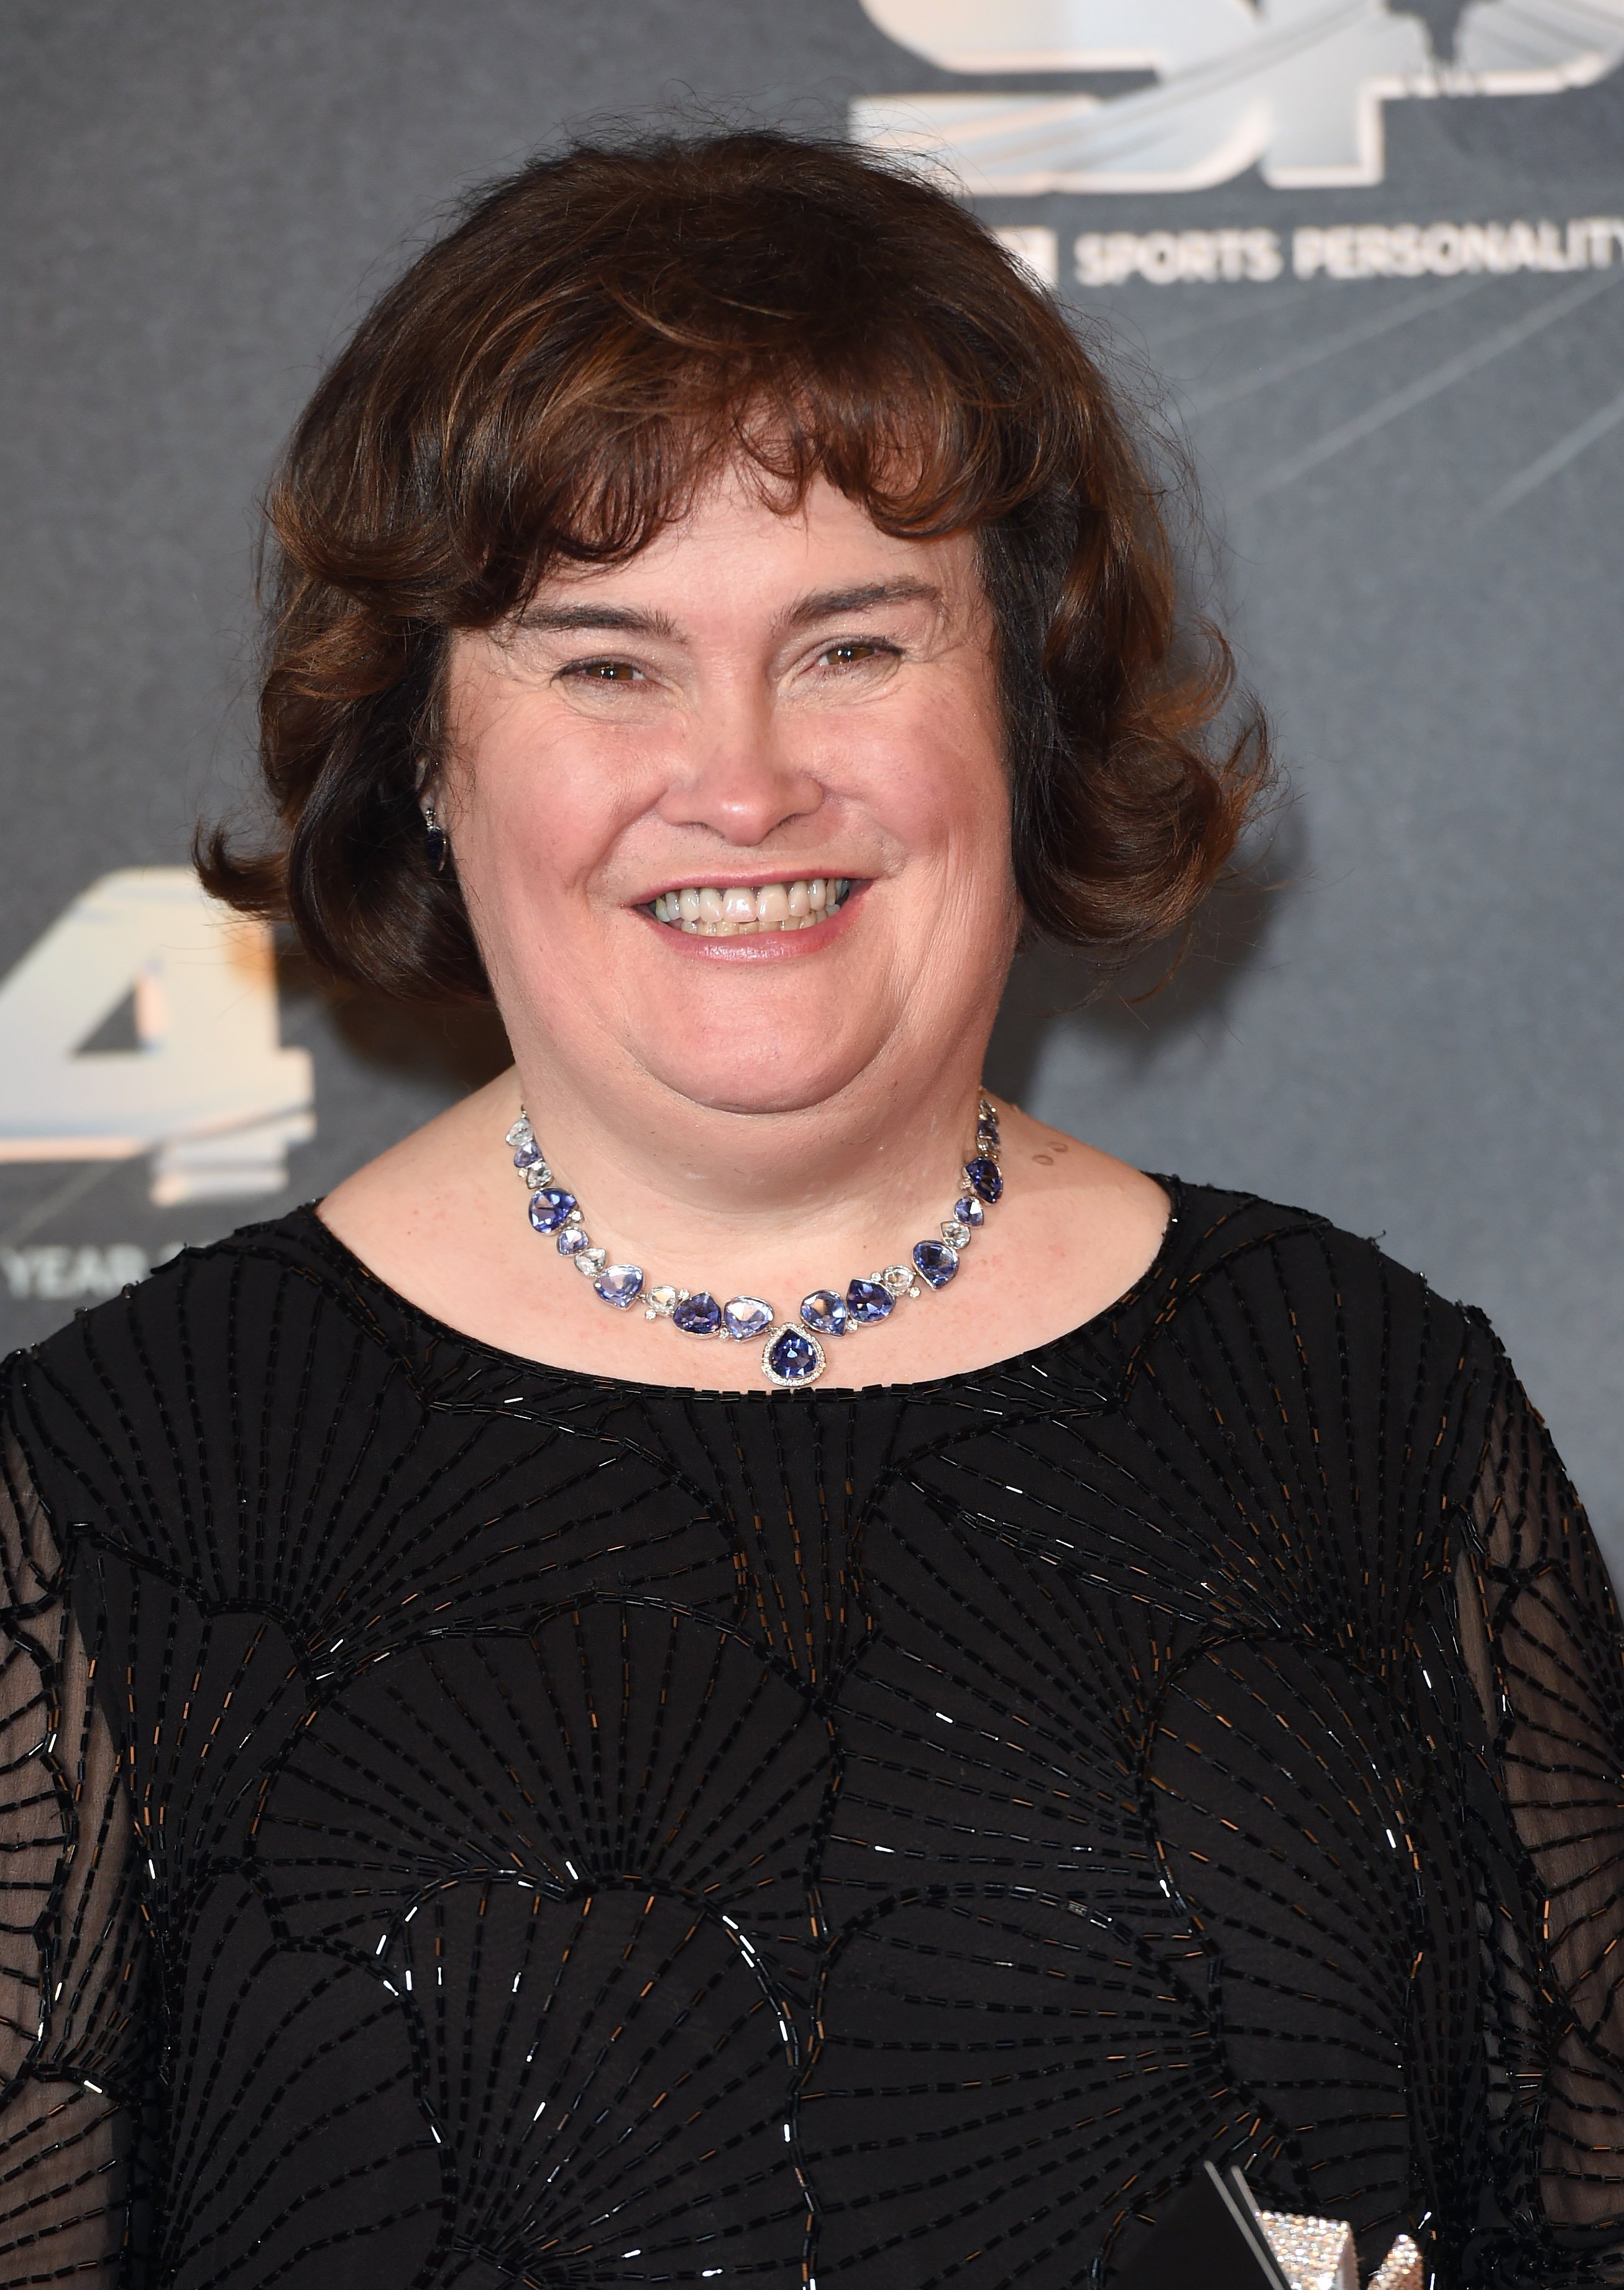 Susan Boyle attends the BBC Sports Personality of the Year awards at The Hydro on December 14, 2014. | Photo: GettyImages